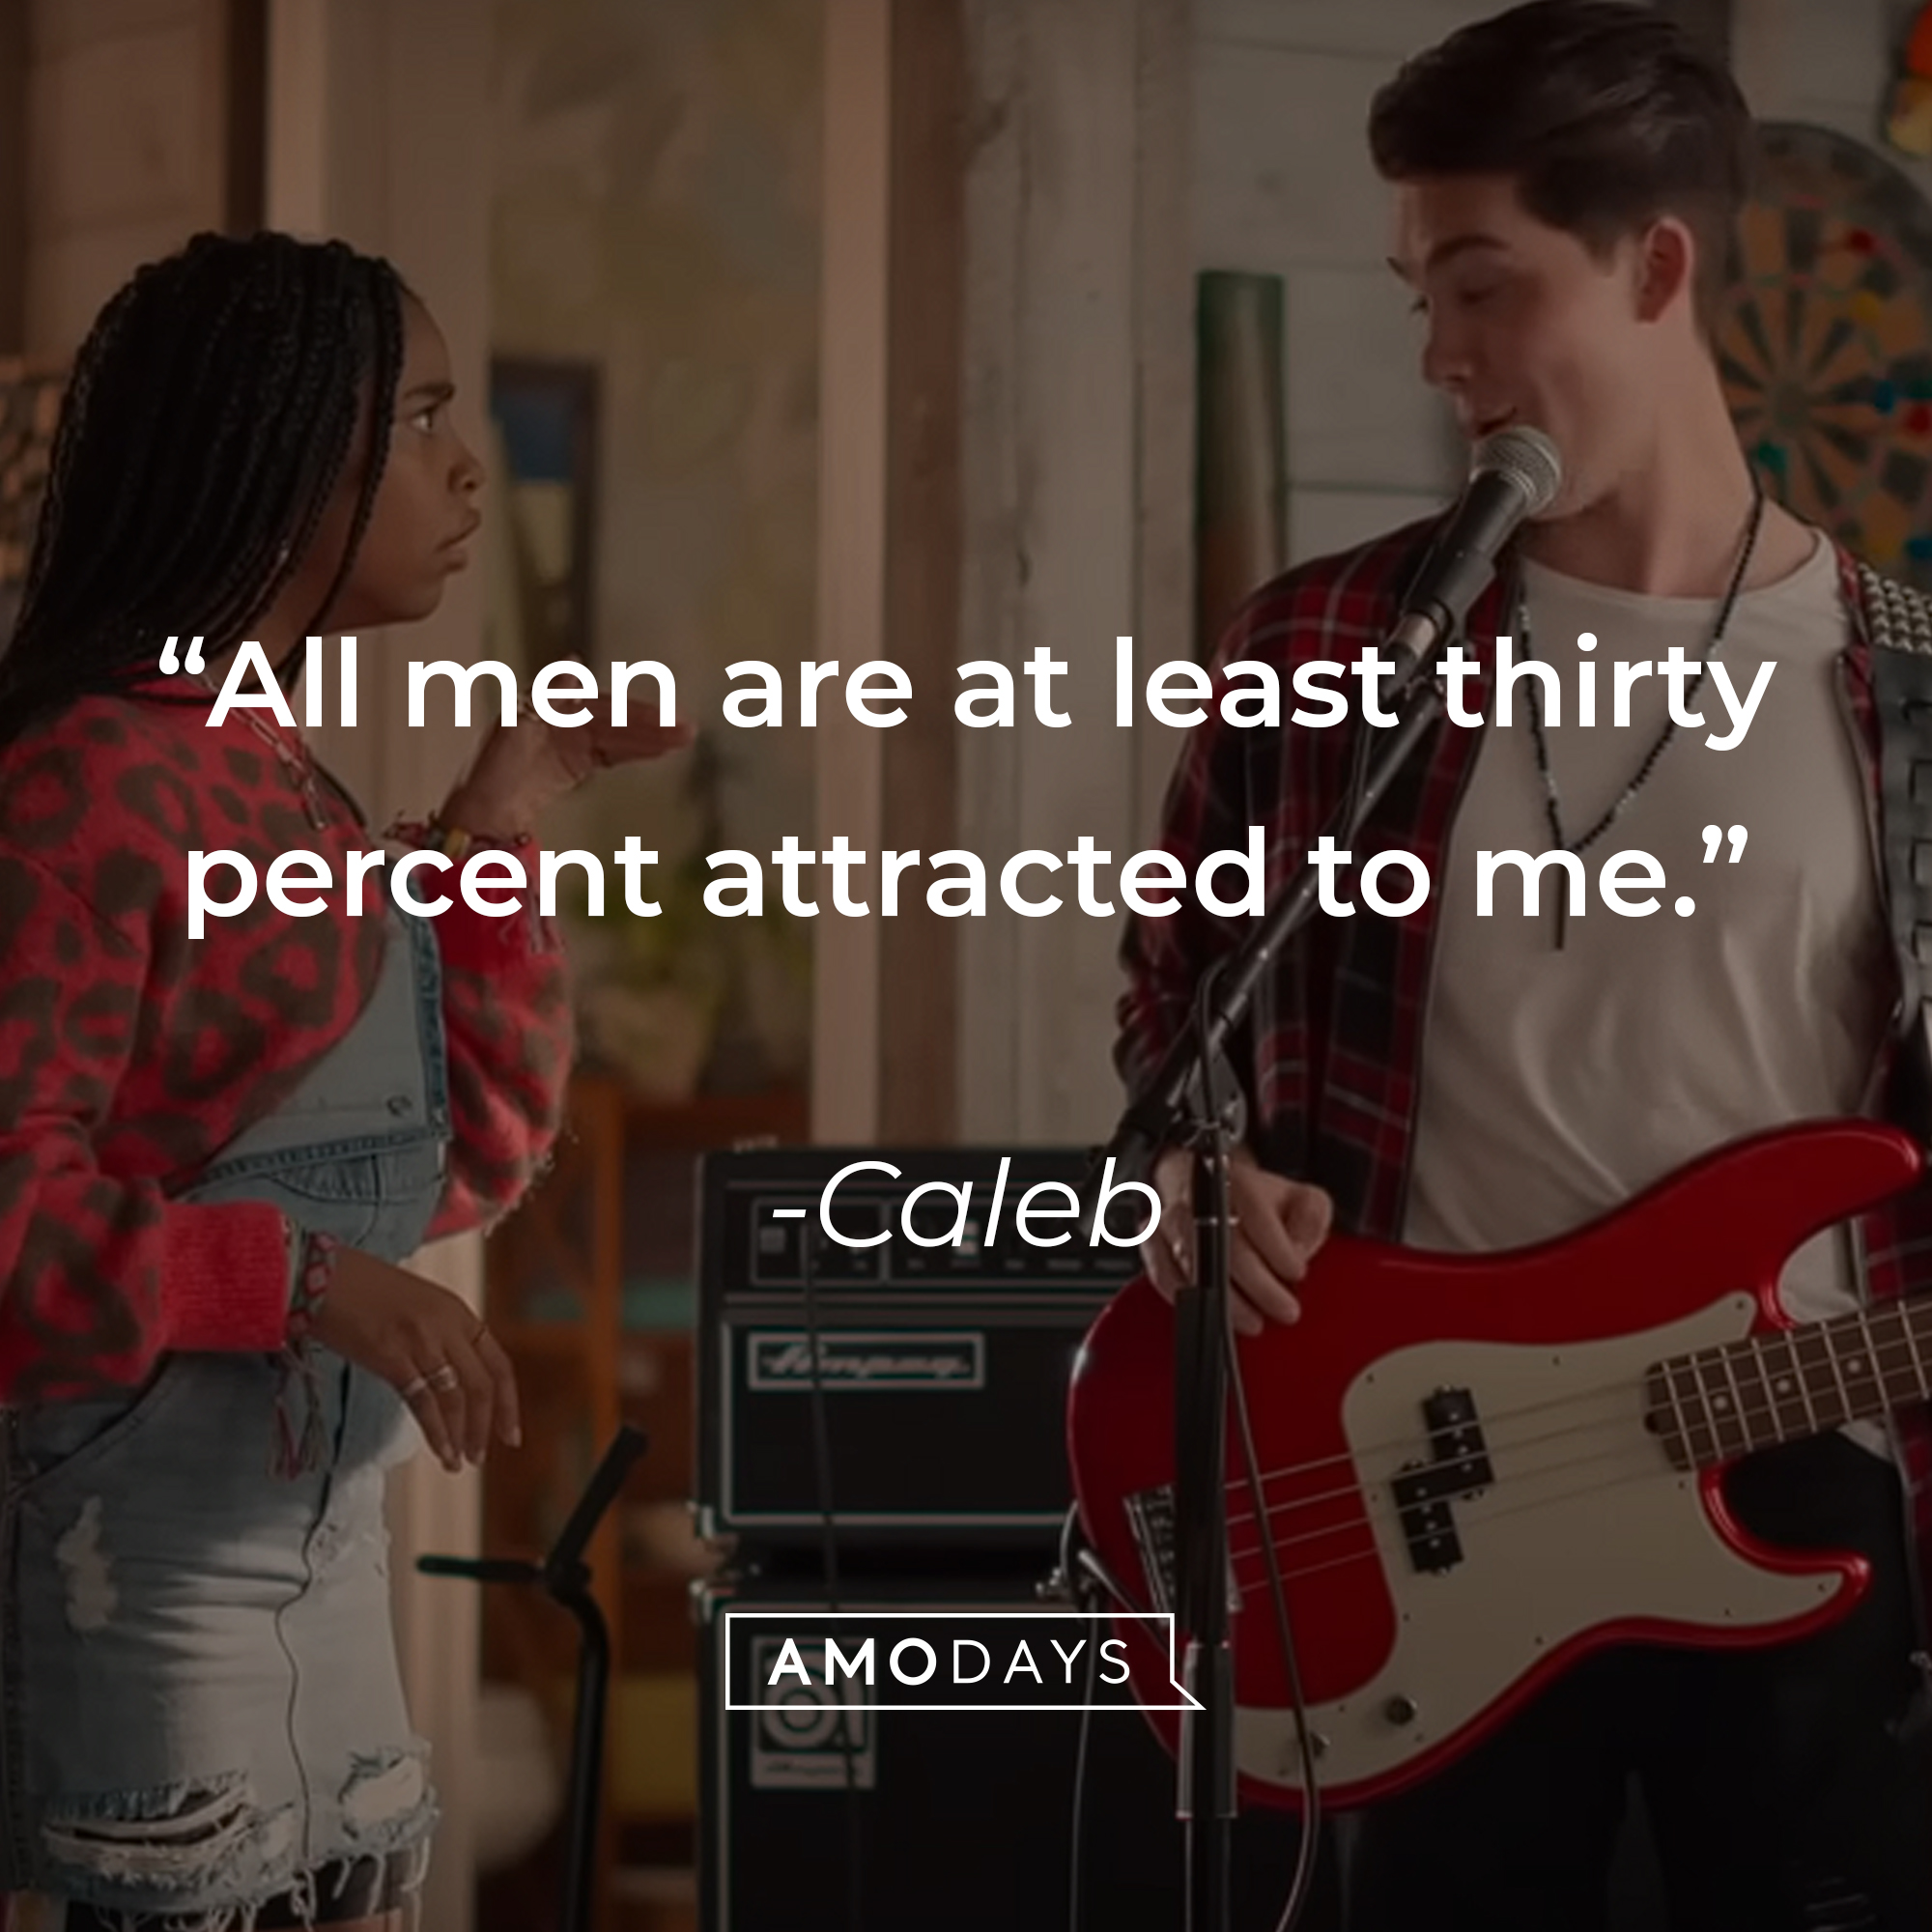 An image of Julie with Reggie with Caleb’s quote: “All men are at least thirty percent attracted to me.” | Source: youtube.com/netflixafterschool